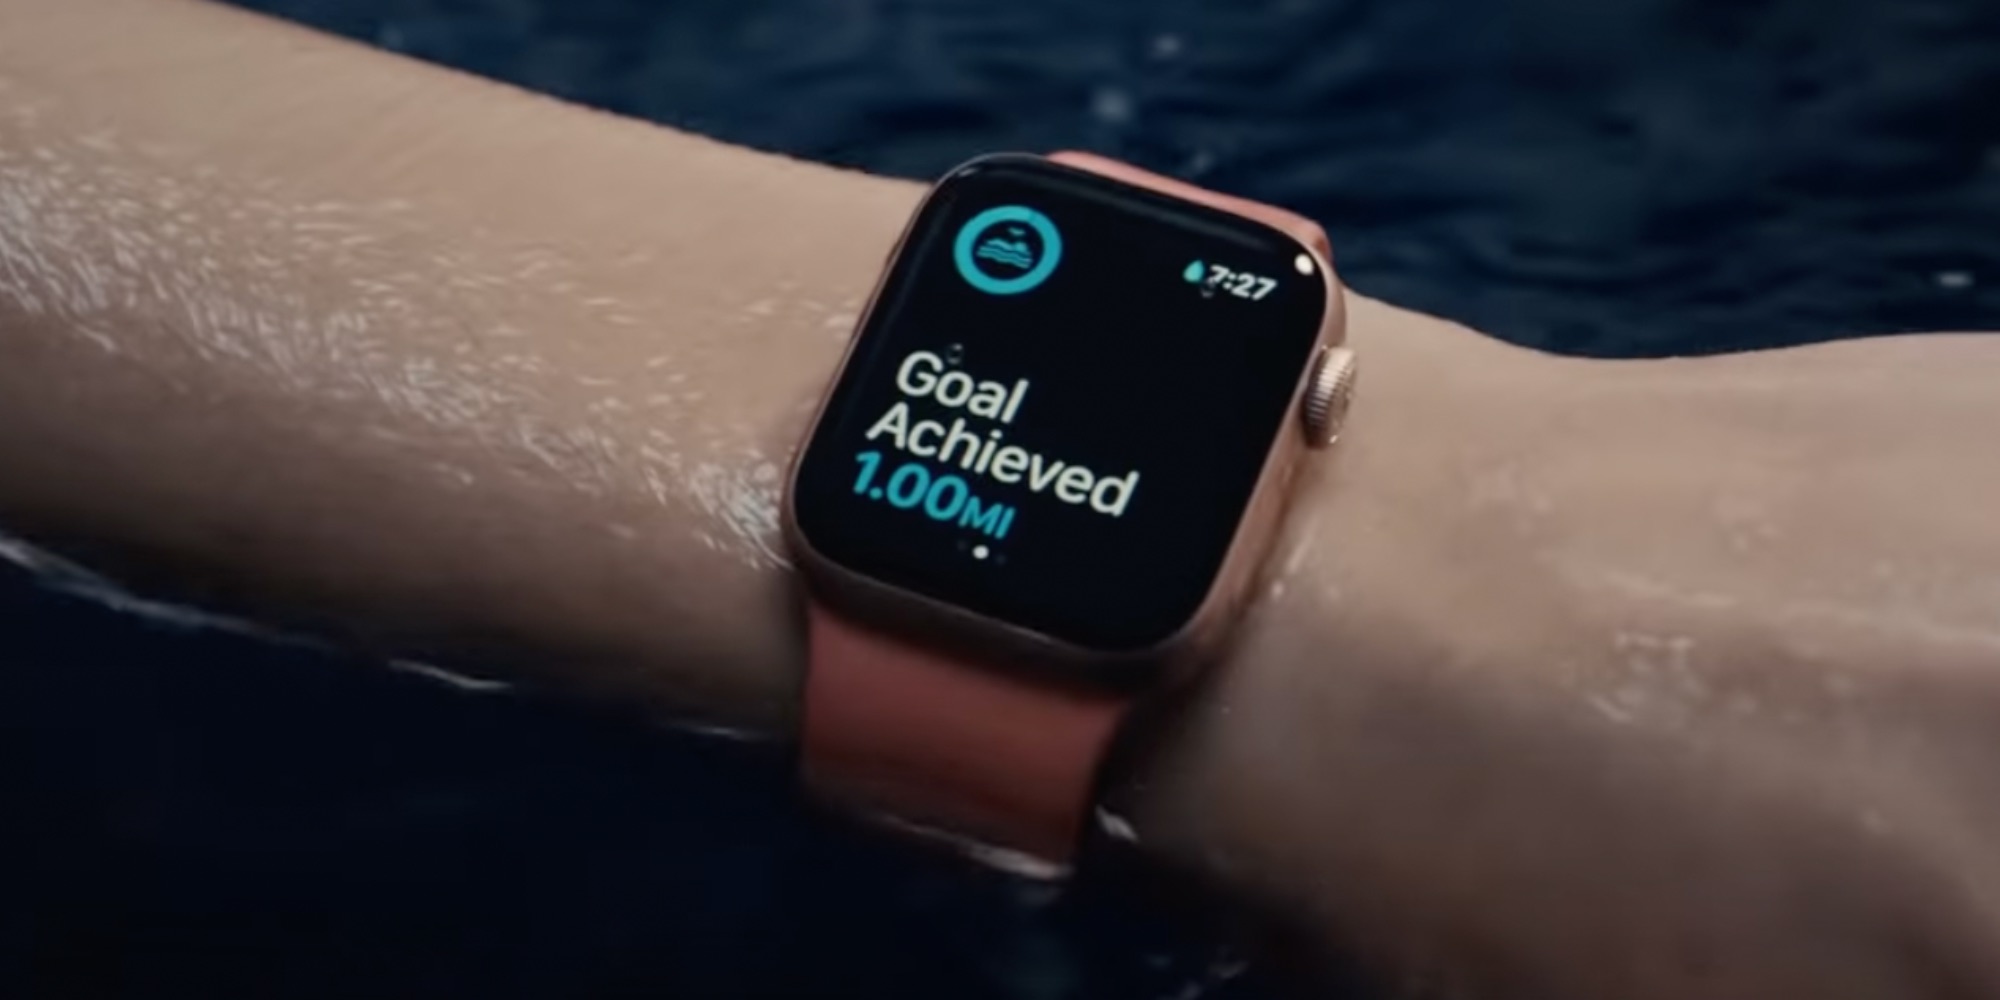 Apple Watch workout and sleep tracking is the future of health in latest ad campaign